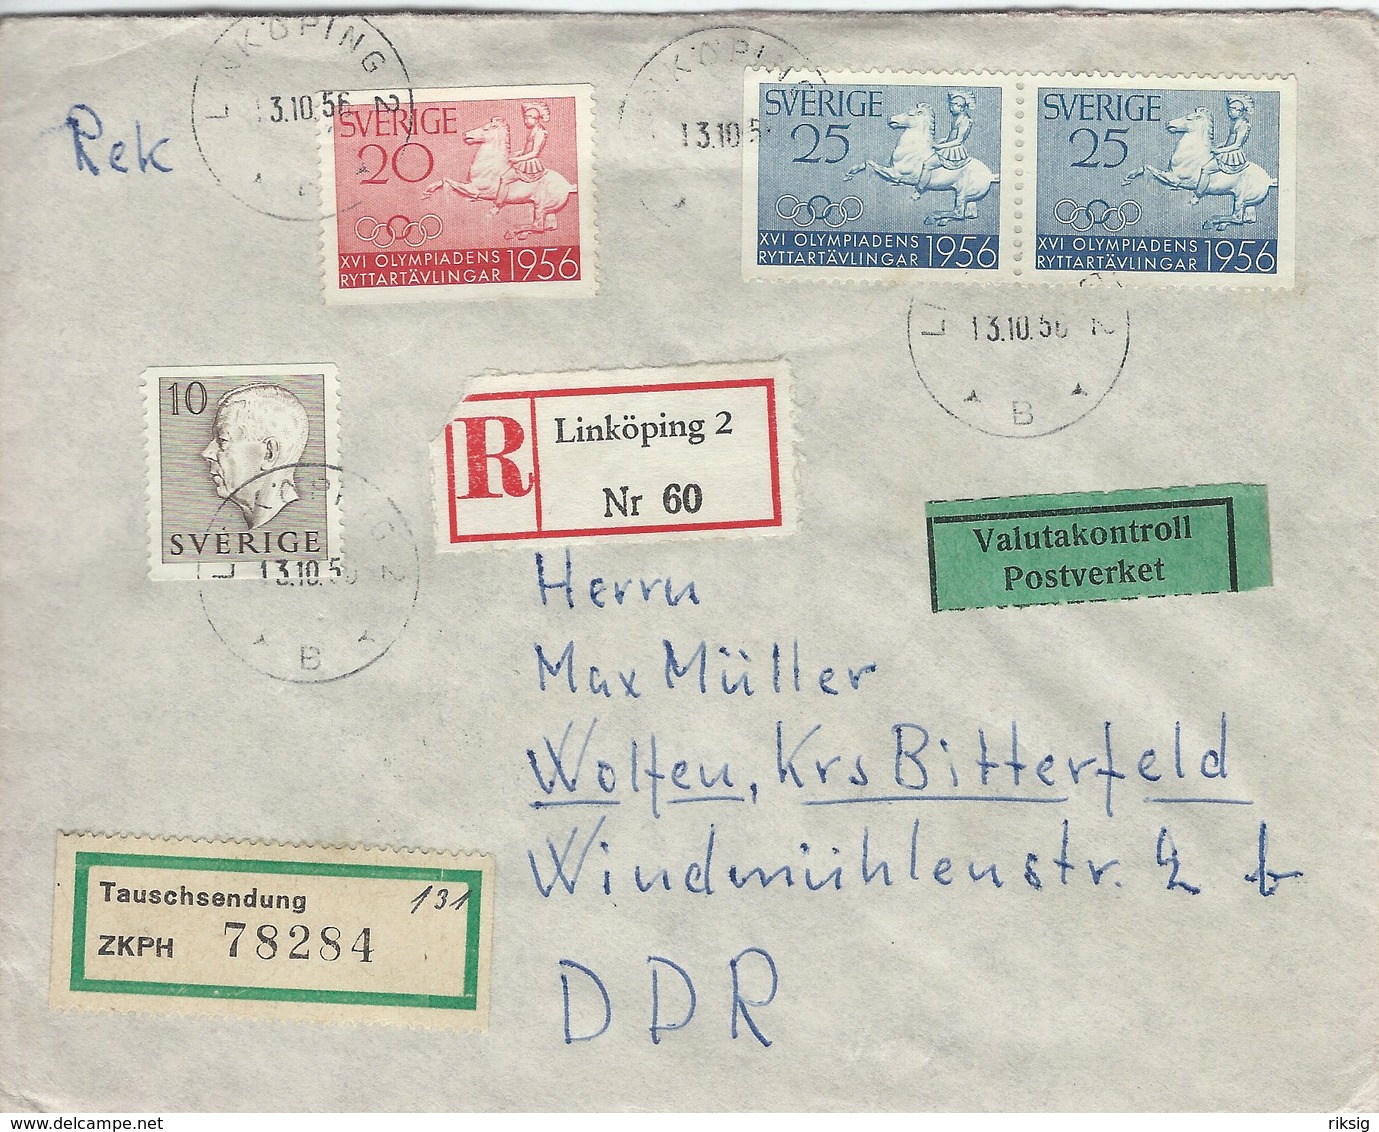 Sweden - Registered Cover Sent To Germany ( DDR)  1956    # 471 # - Covers & Documents